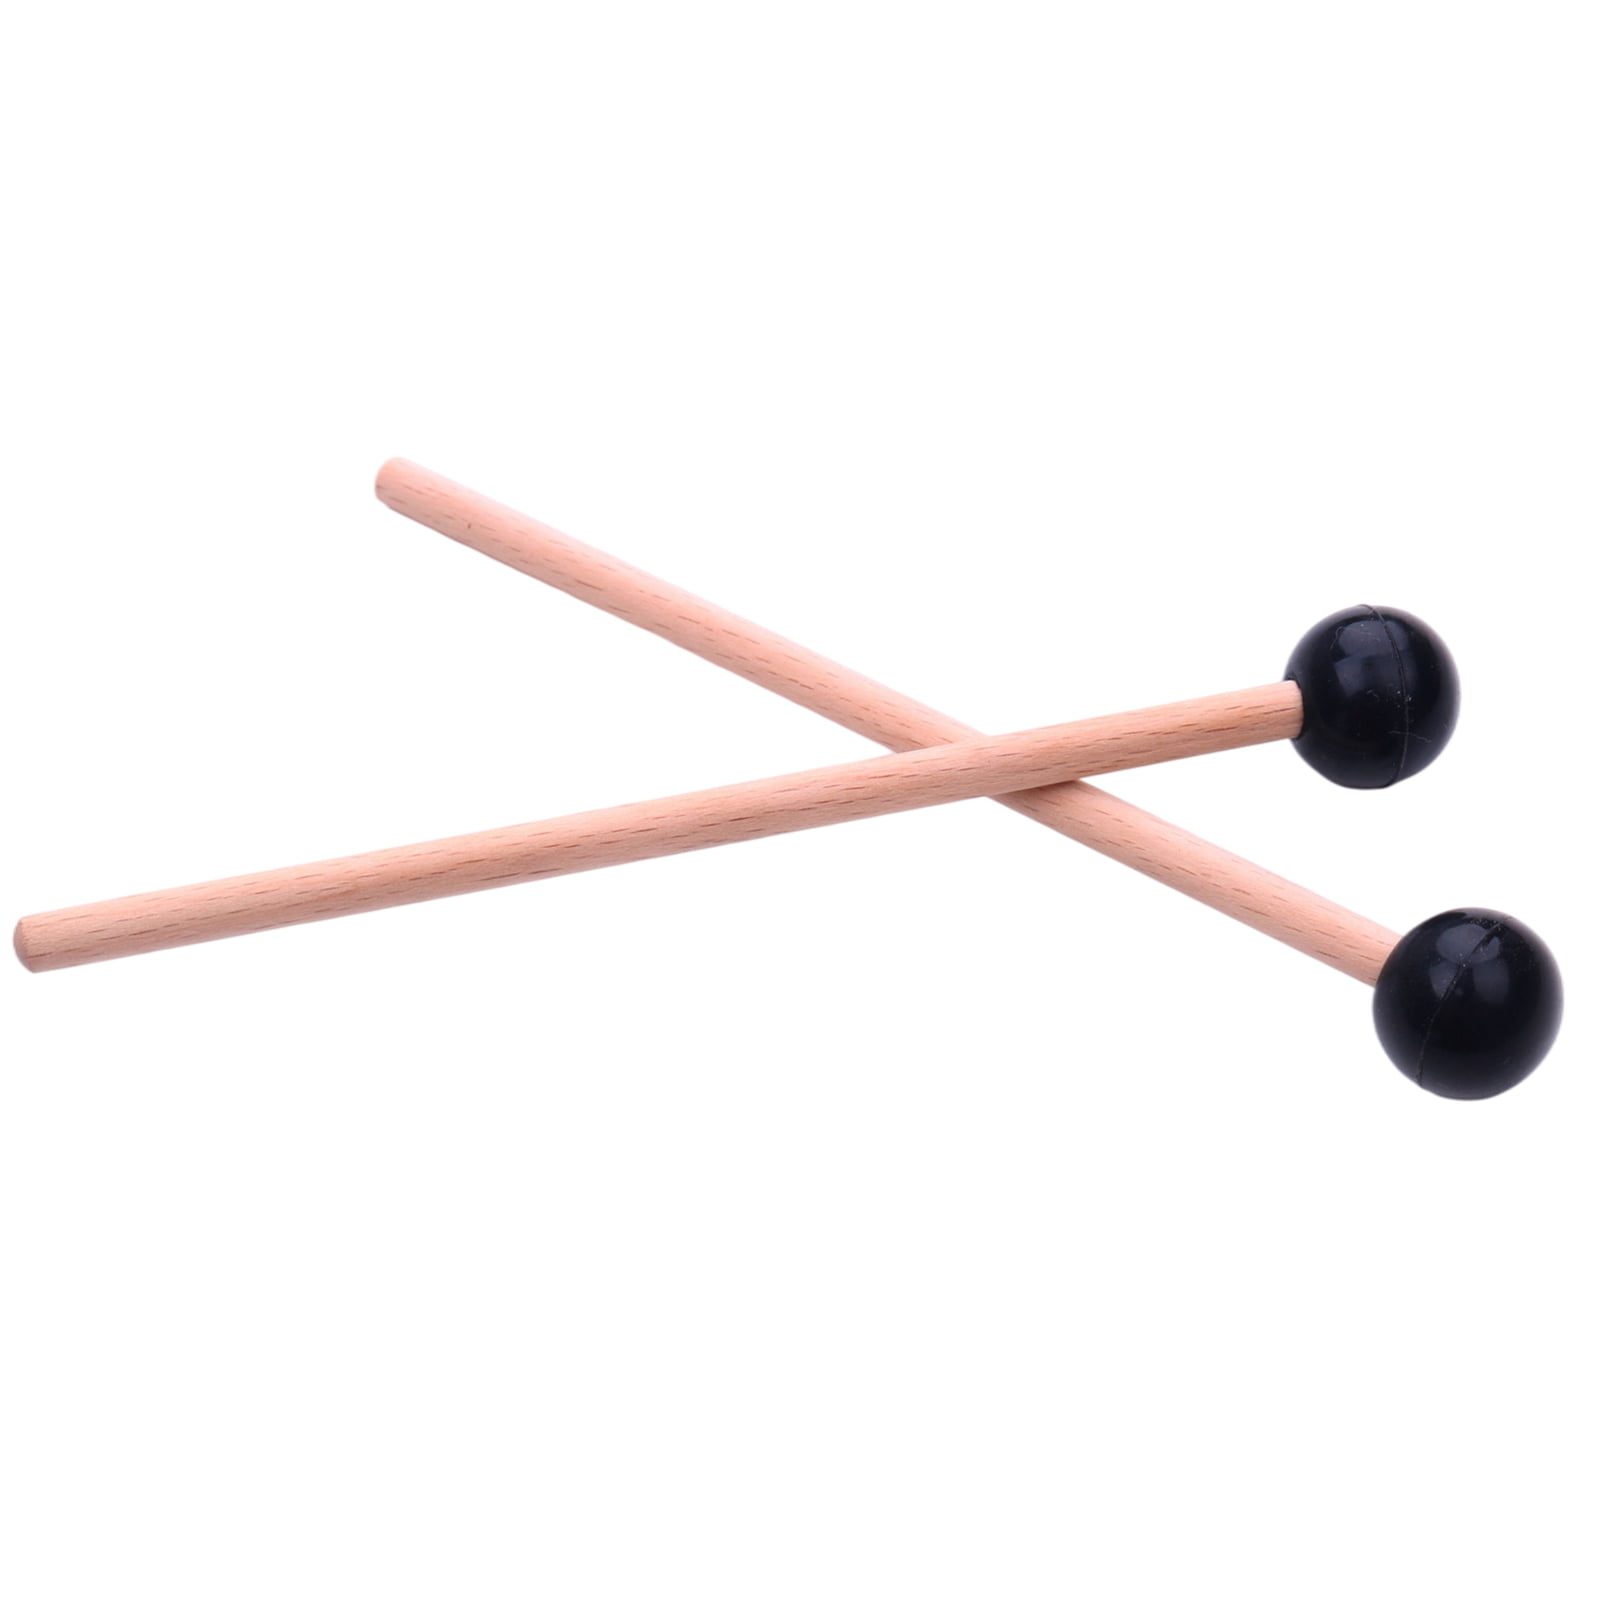 1 Pair of Marimba Mallets with Wooden Handle for Piano Percussion Instrument 